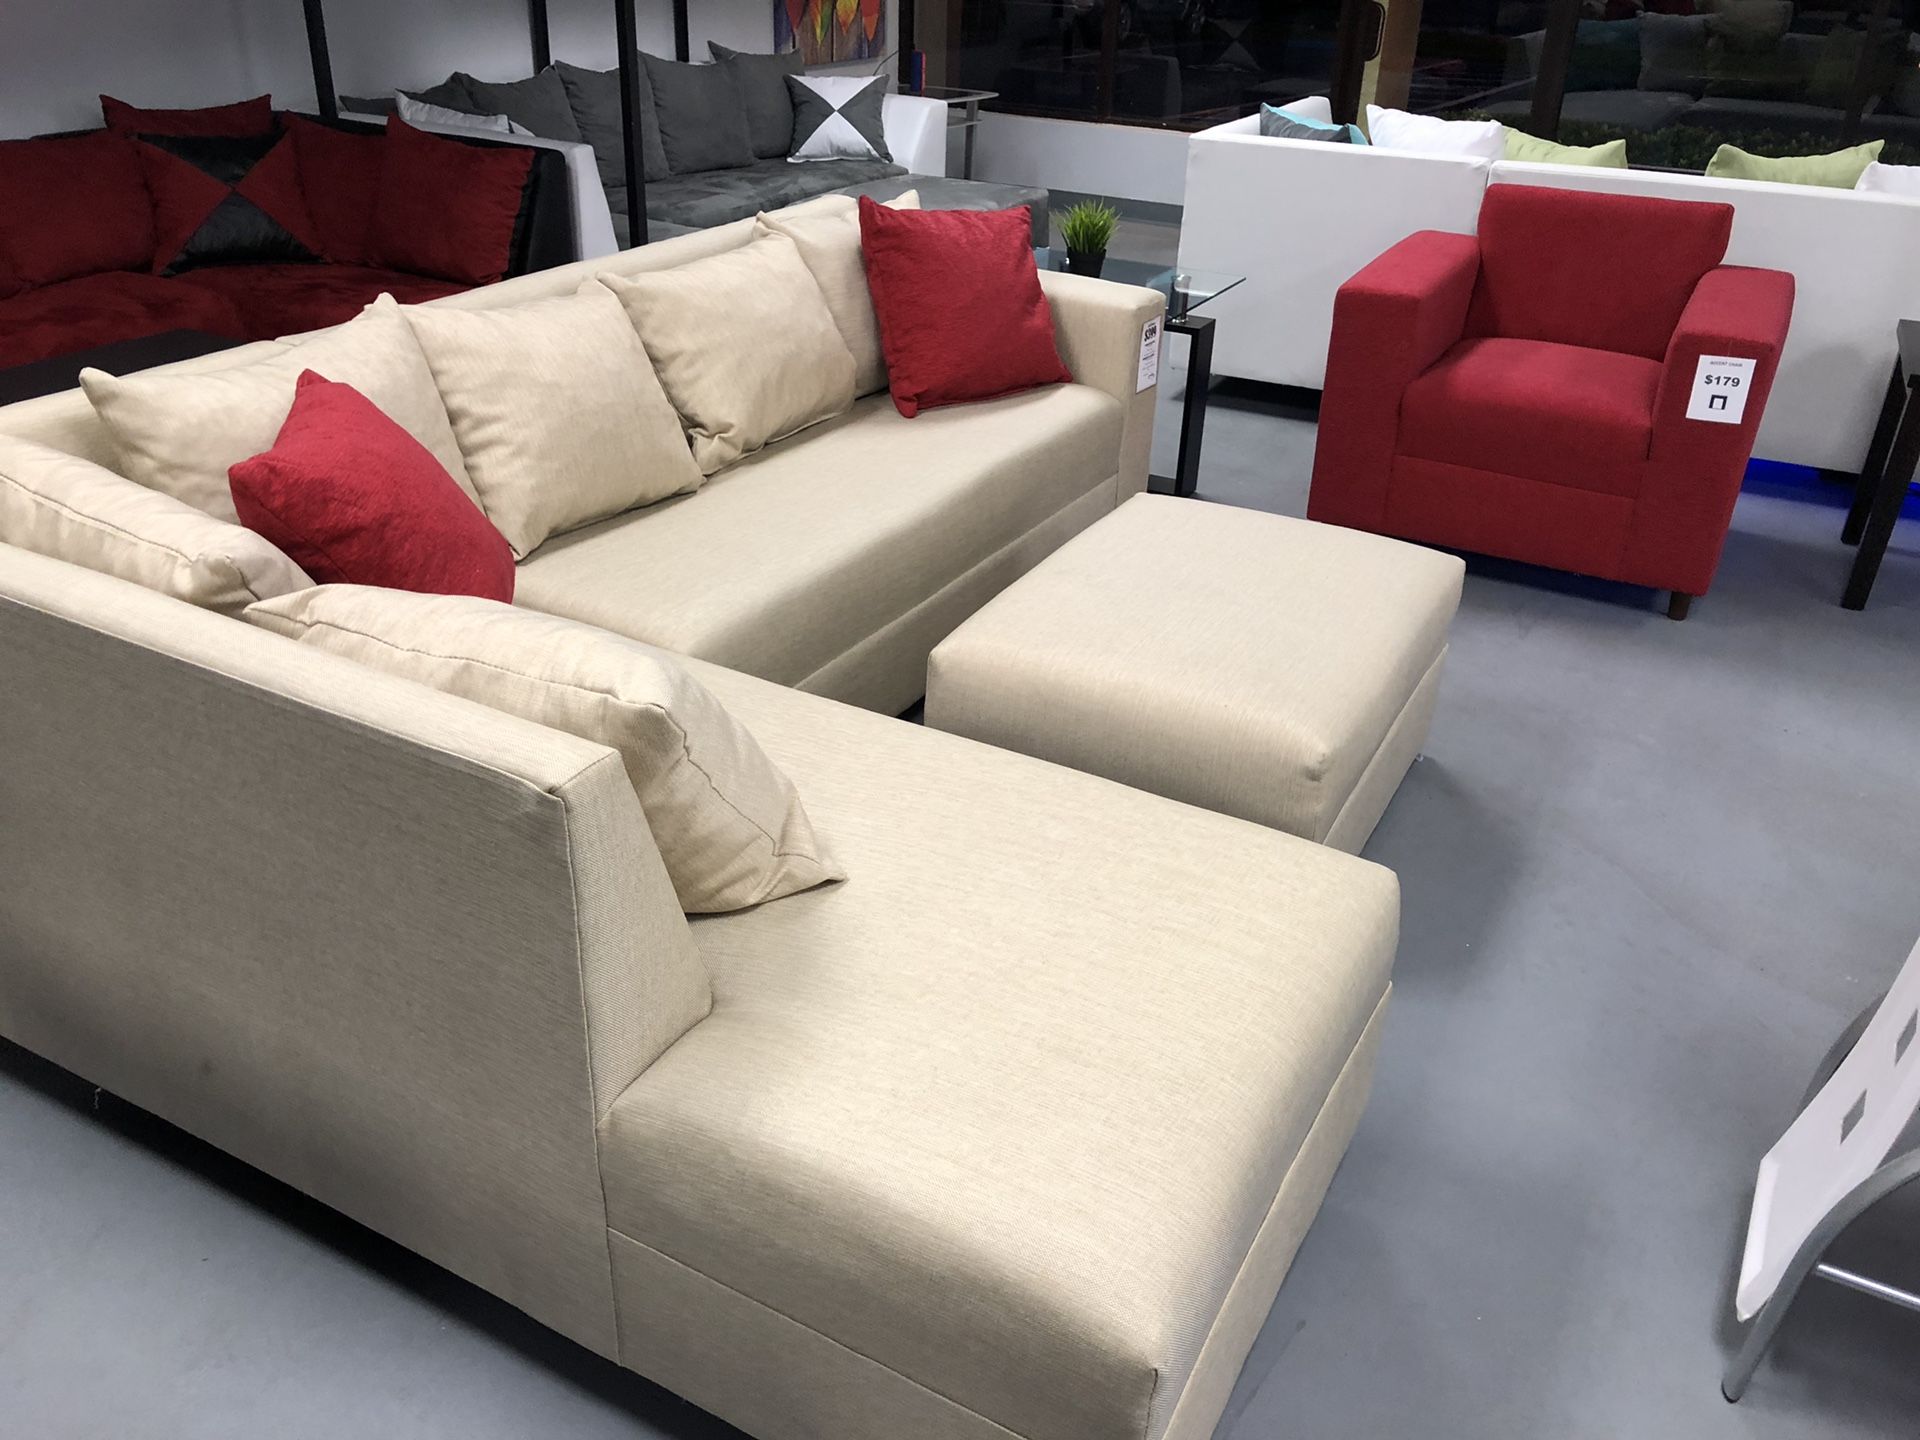 Sectional sofa only or complete living room set couch